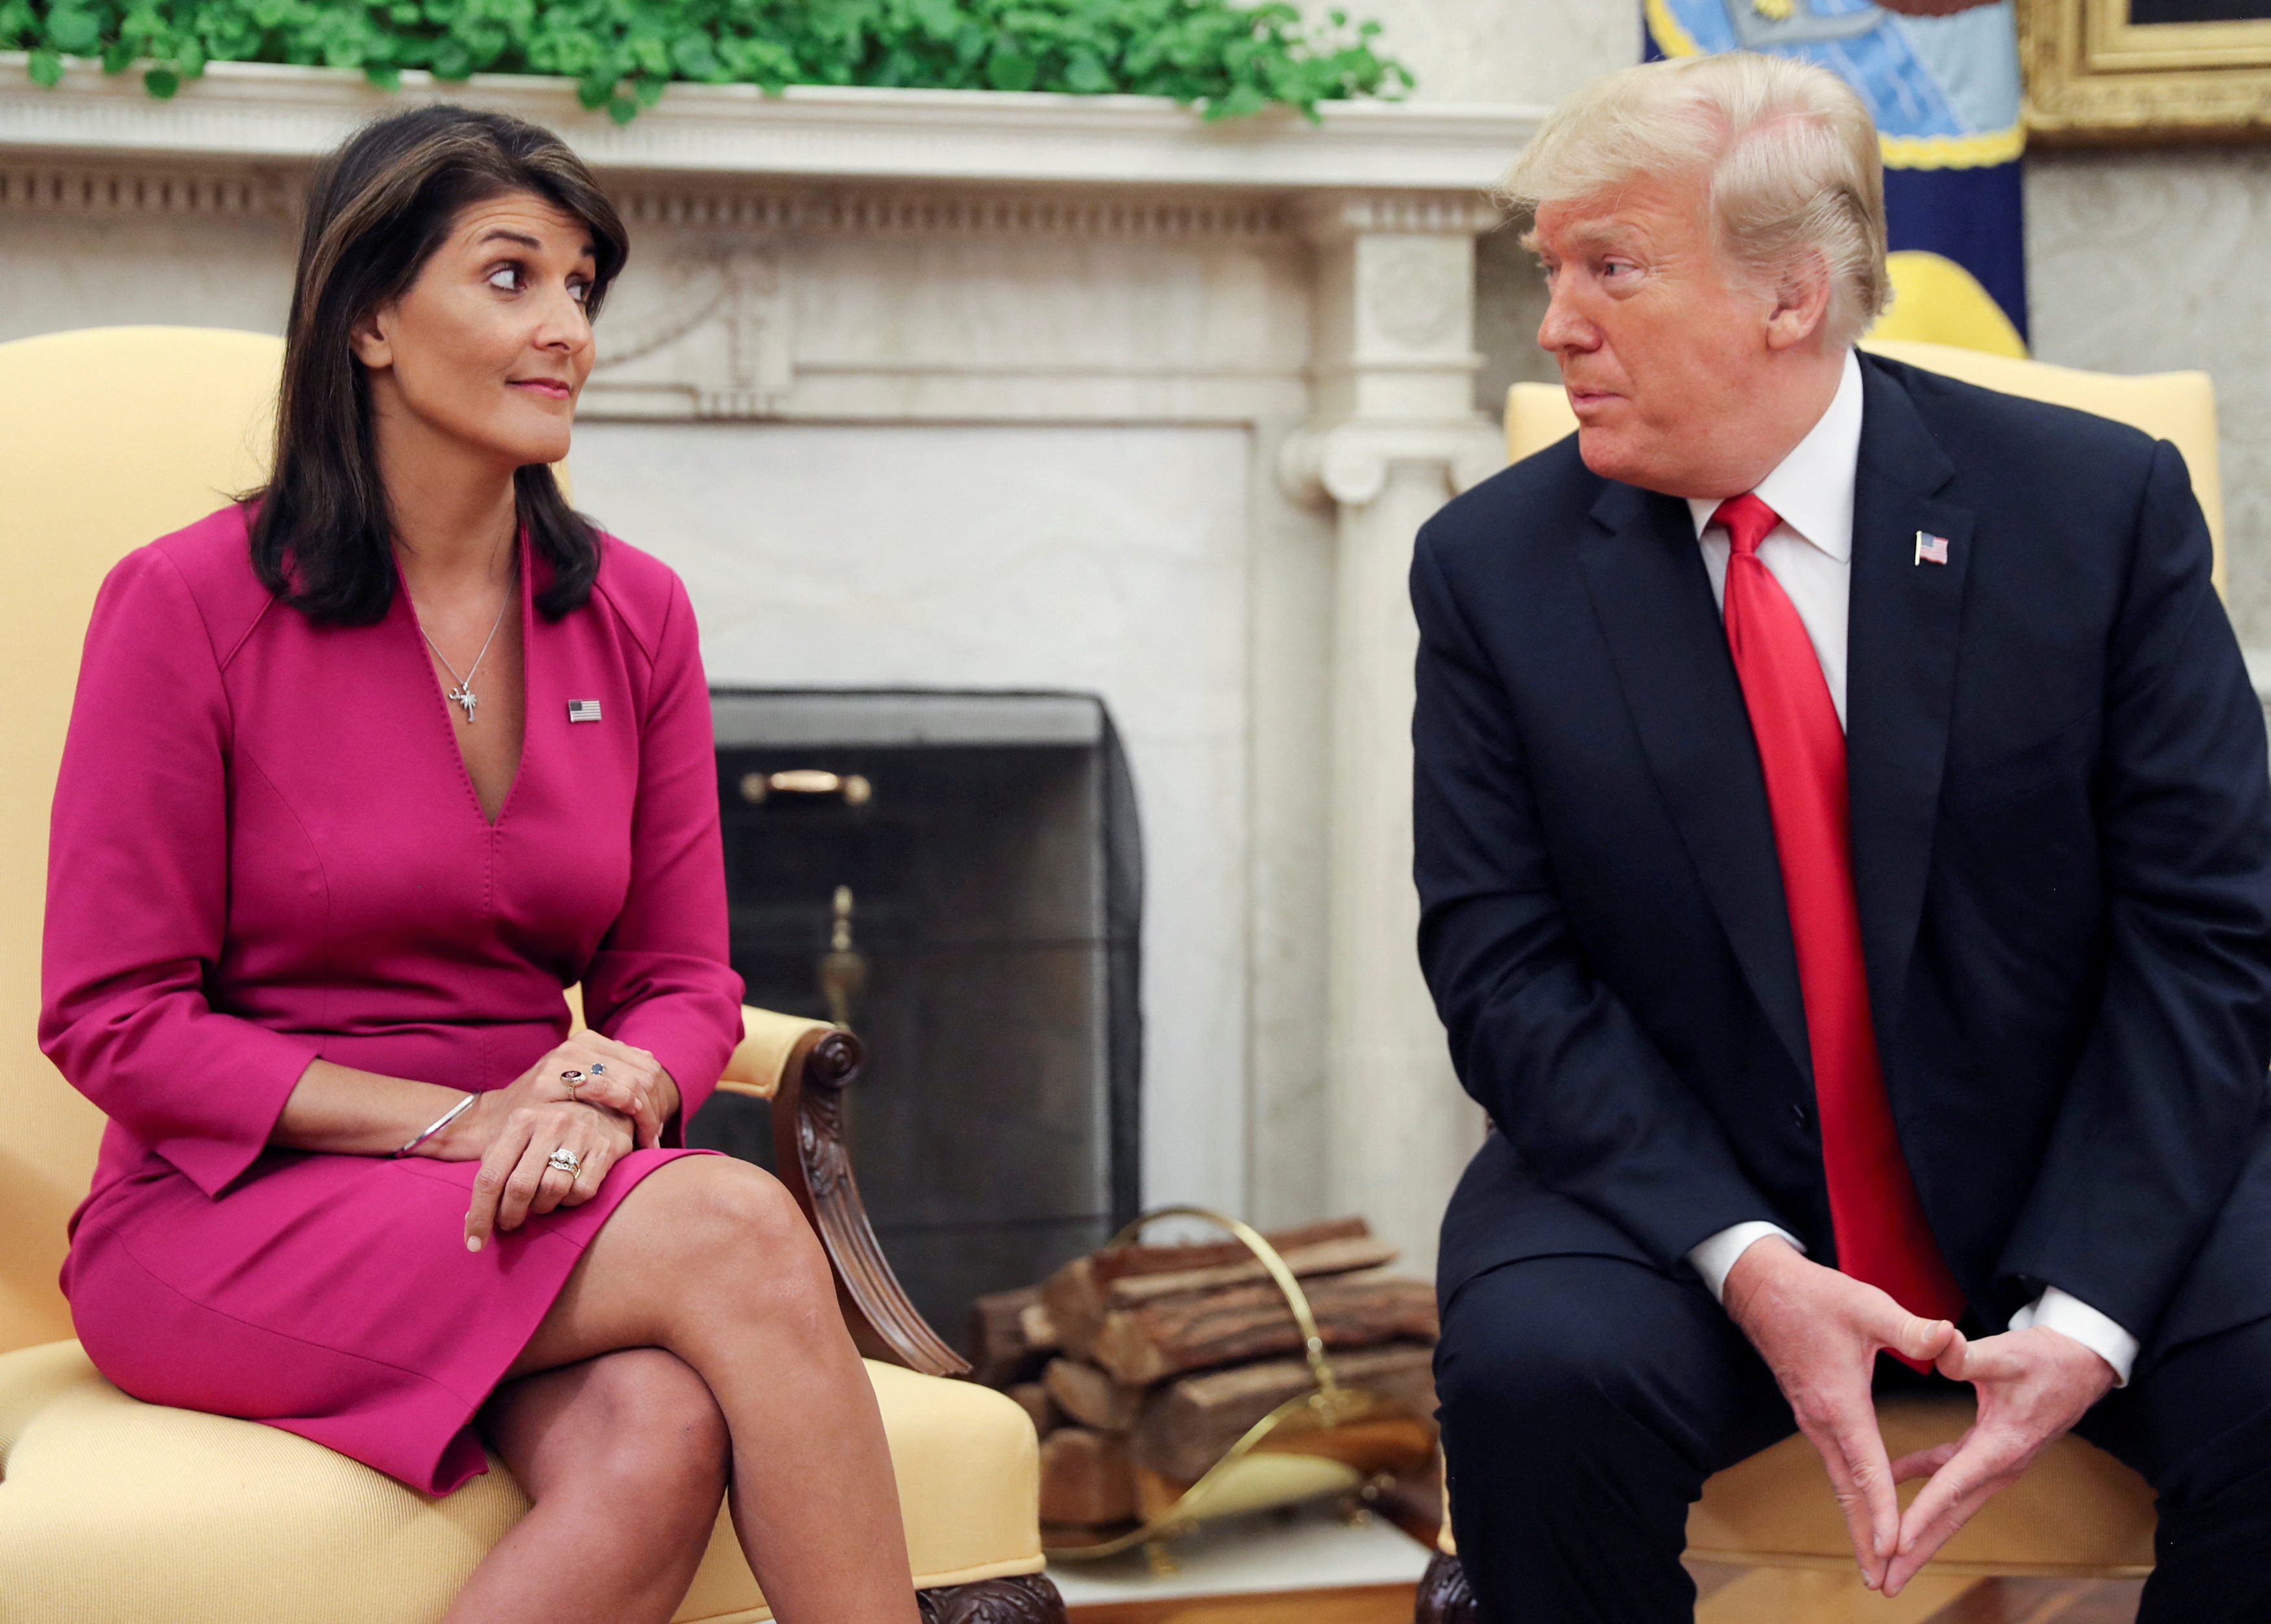 U.S. President Trump meets with U.N. Ambassador Haley in the Oval Office of the White House in Washington